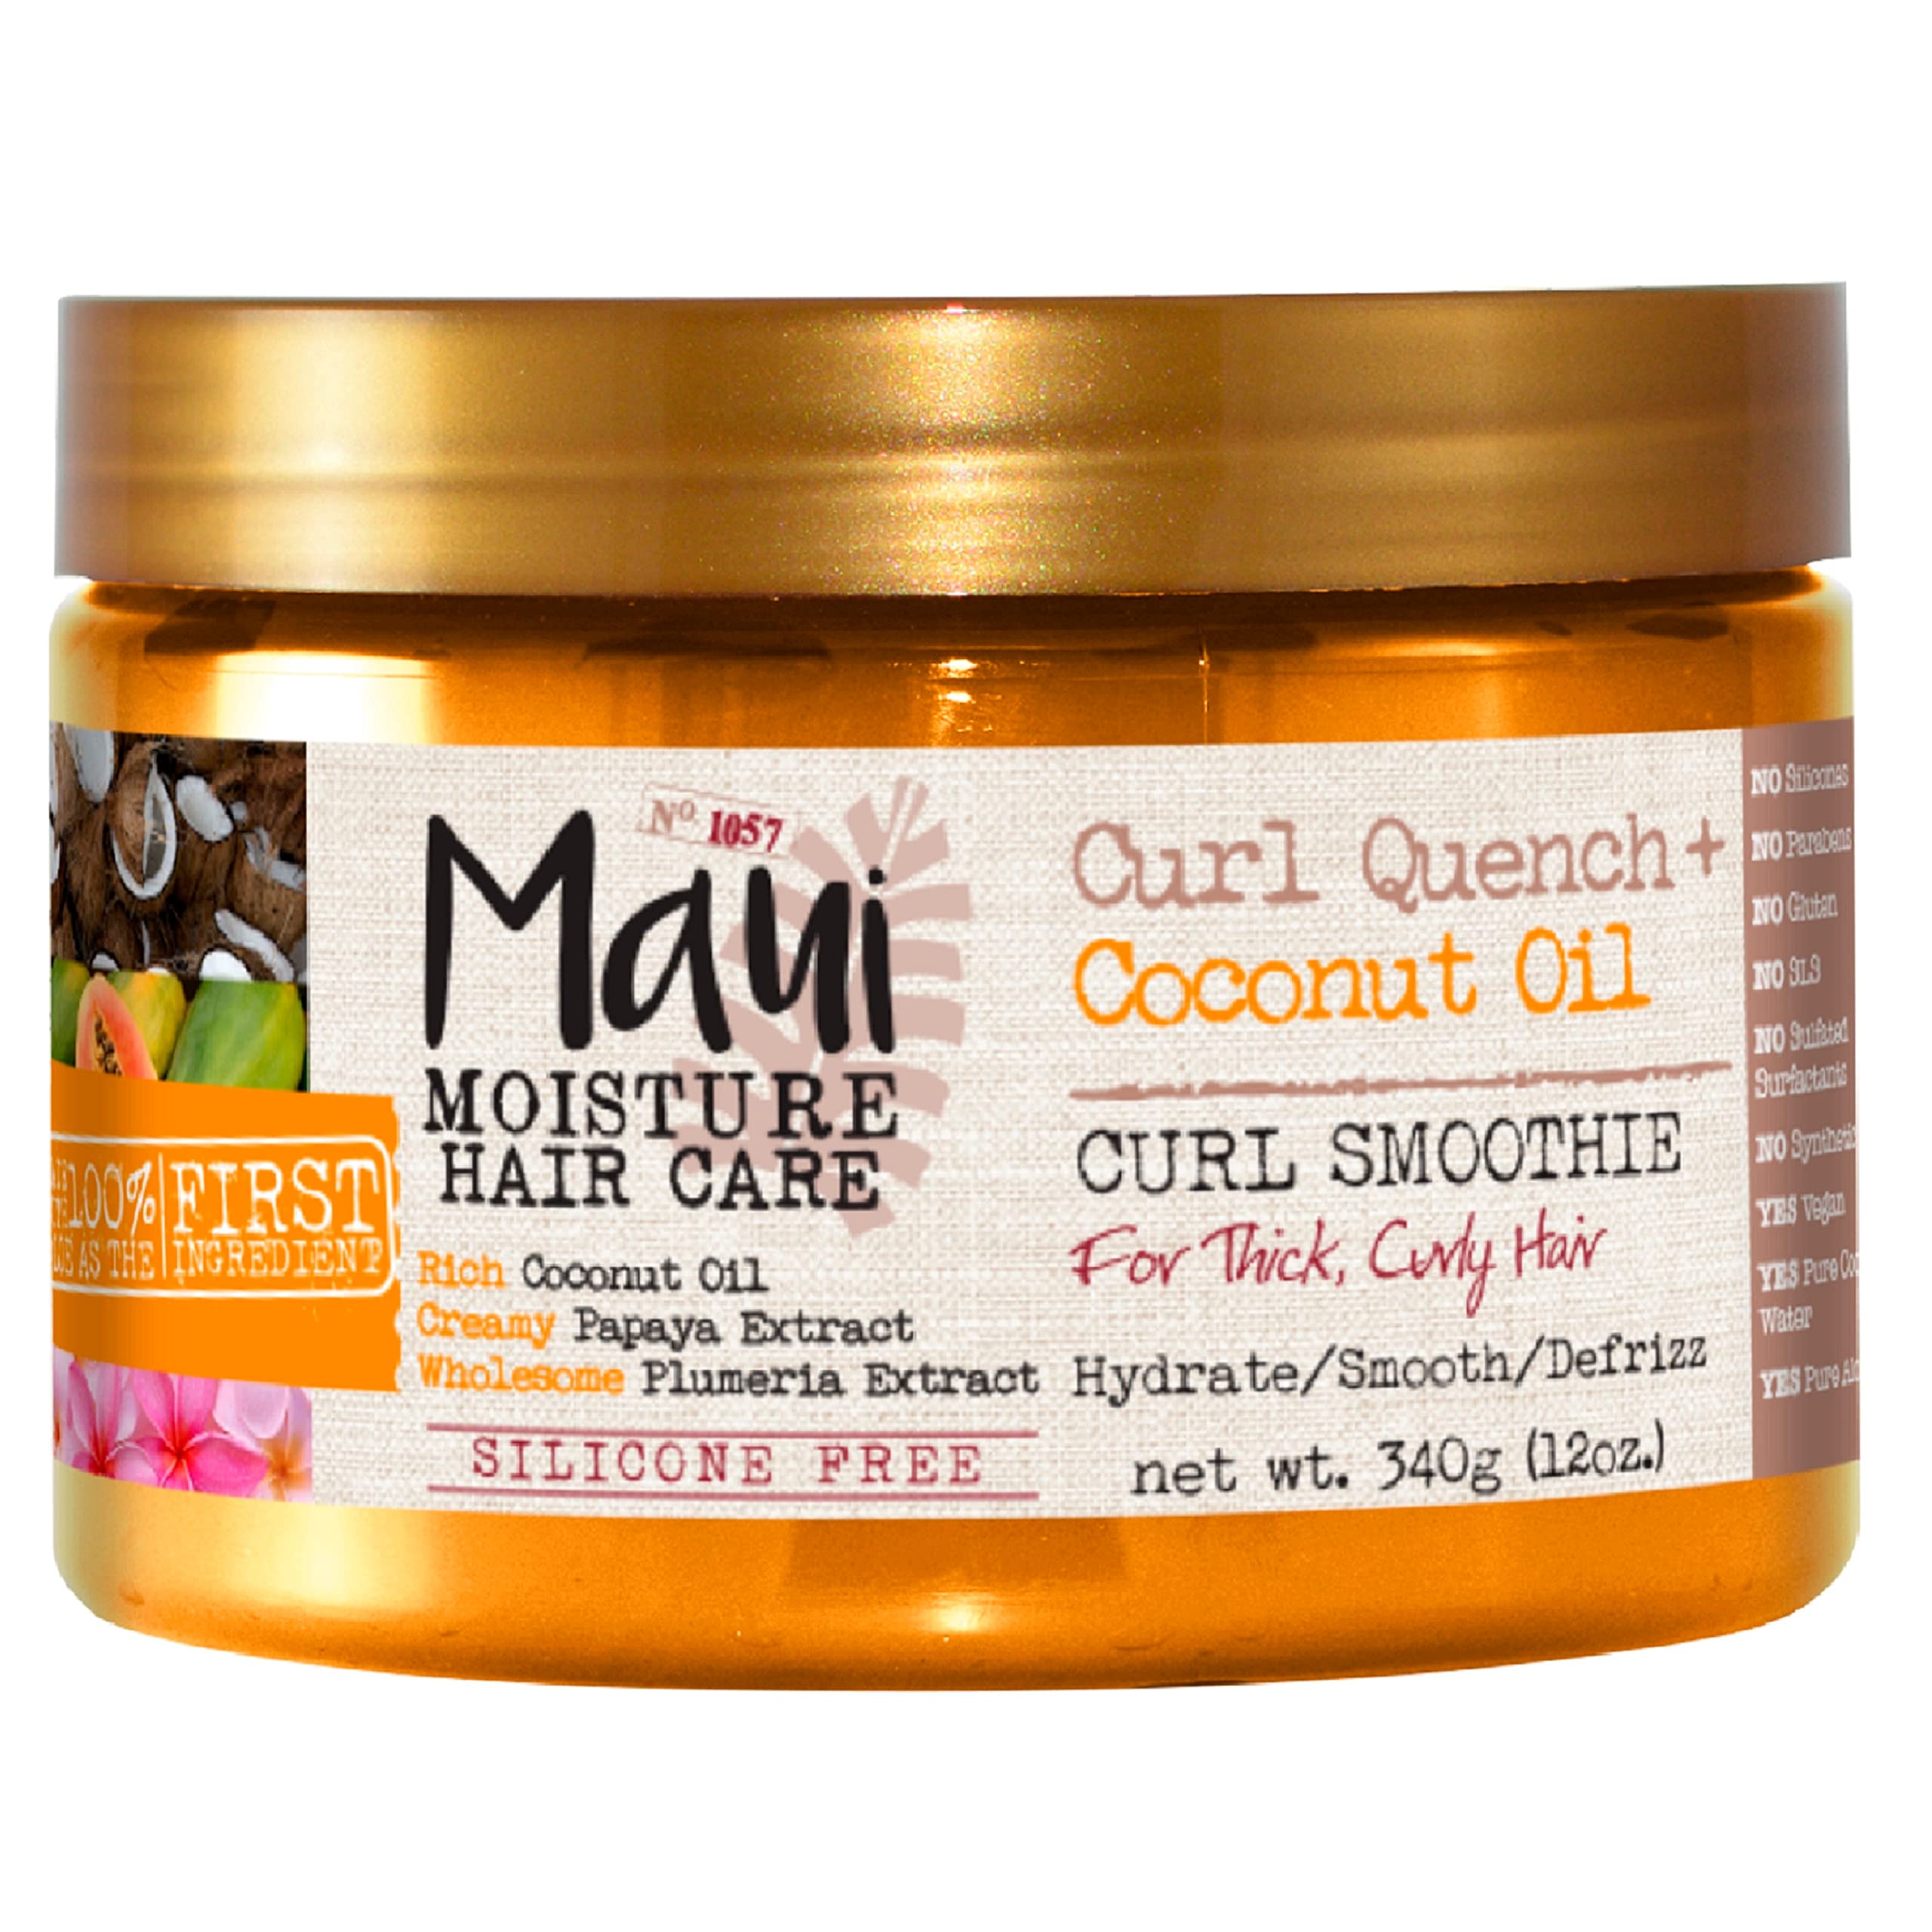 Mua Maui Moisture Curl Quench + Coconut Oil Hydrating Curl Smoothie, Creamy  Silicone-Free Styling Cream for Tight Curls, Braids, Twist-Outs & Wash & Go  Styles, Vegan & Paraben-Free, 12 oz trên Amazon